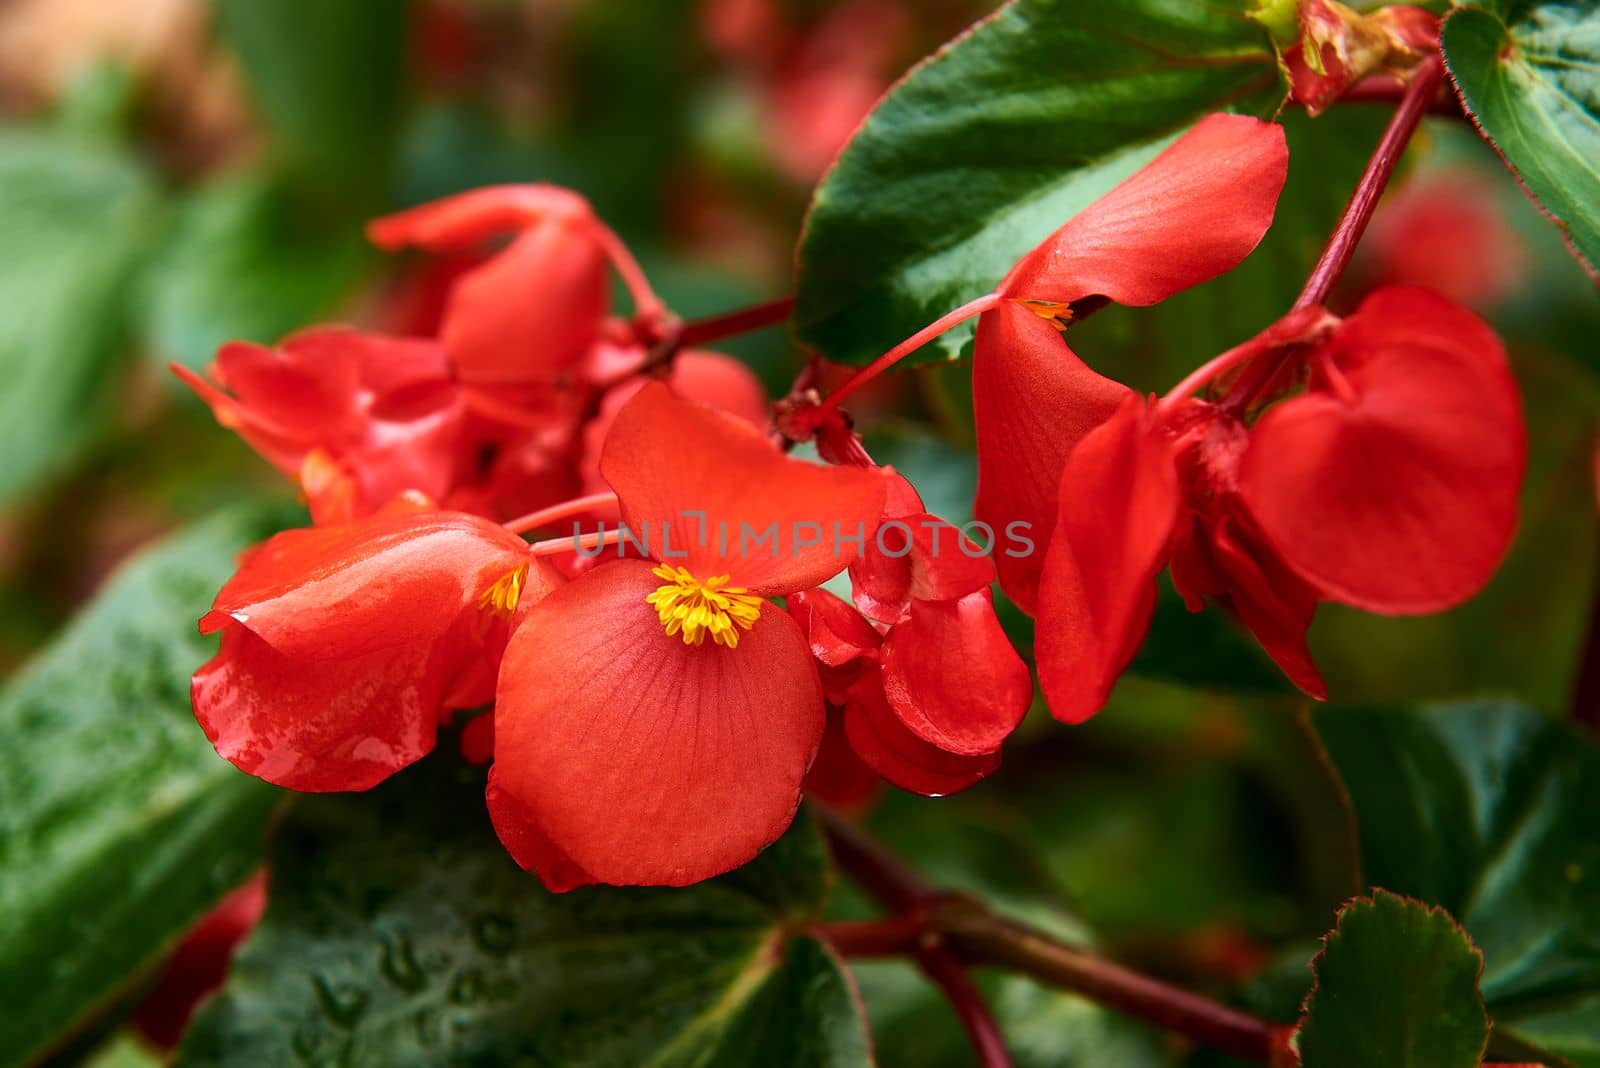 Begonia flower group on a rainy day. Macro photography, out of focus background, raindrops, red and yellow. Begonia evansiana Andrews